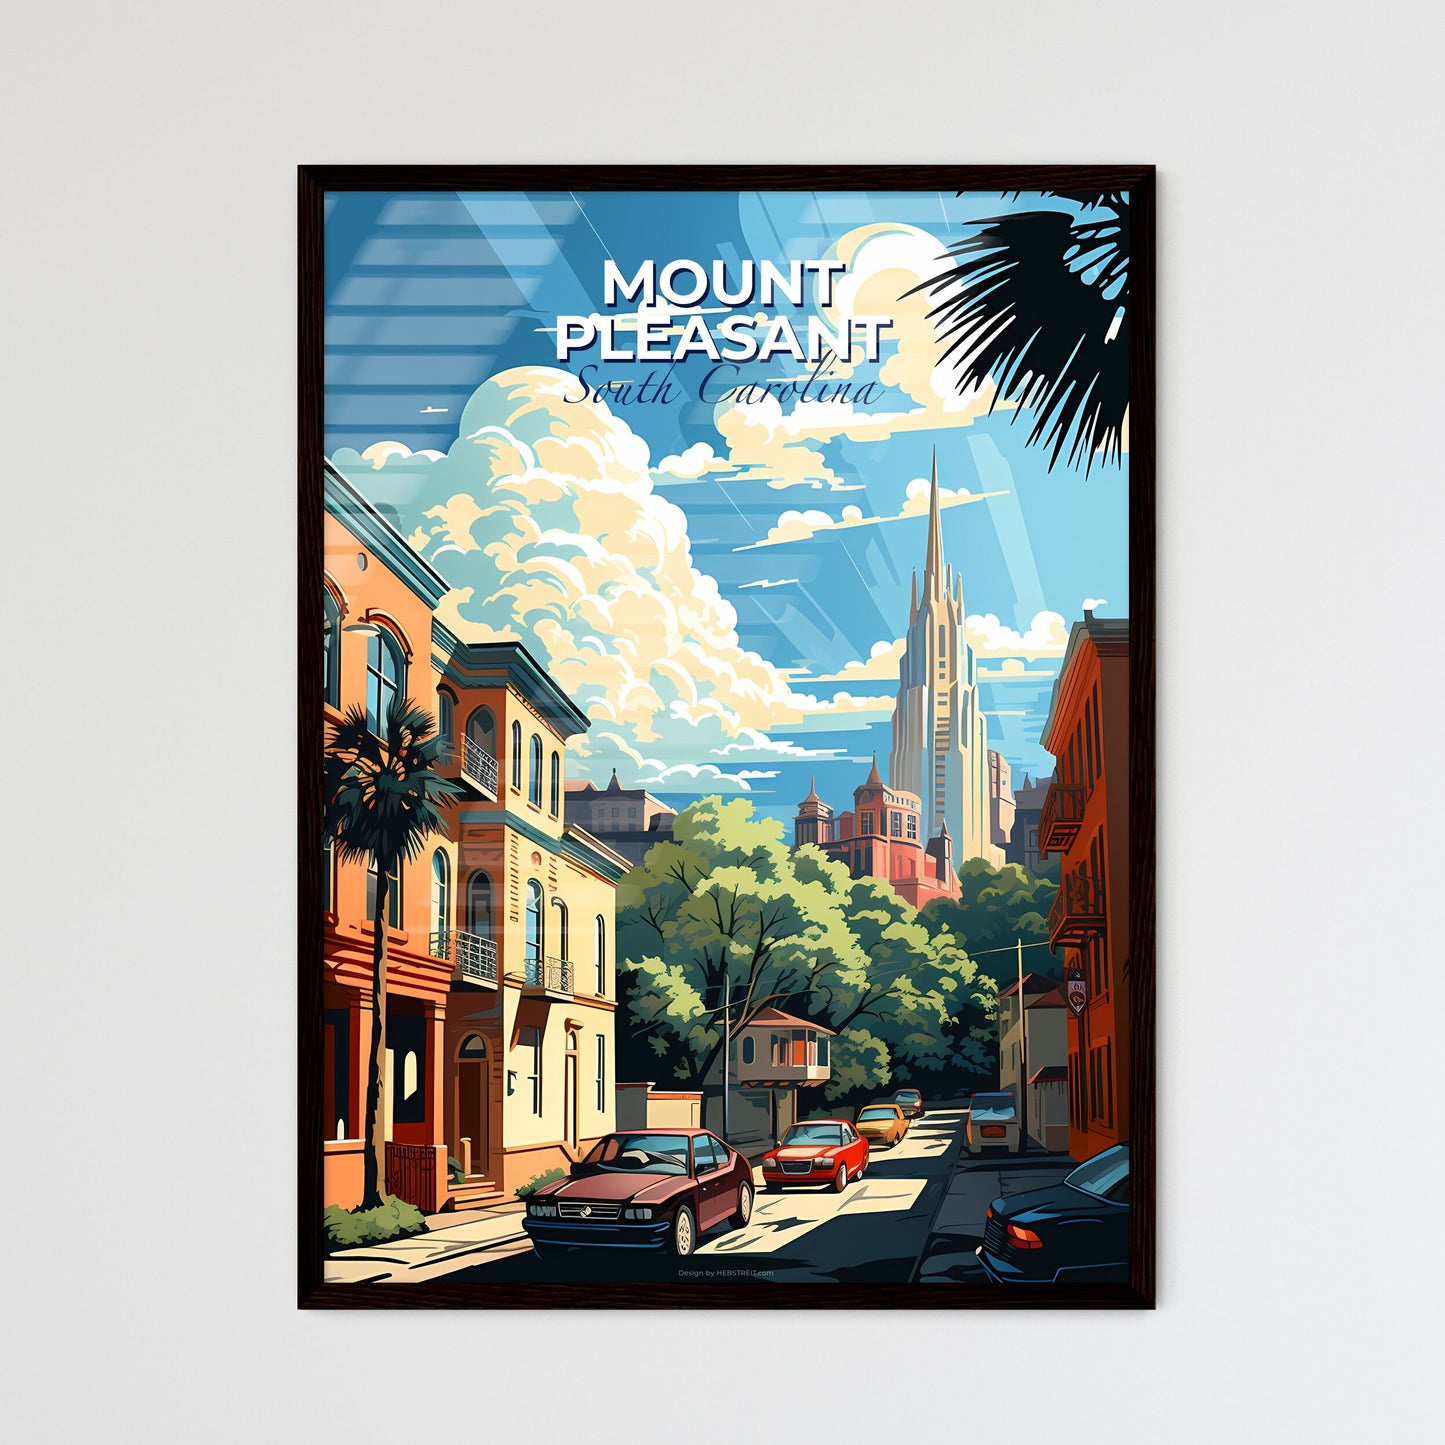 Mount Pleasant, South Carolina, A Poster of a street with cars and trees in front of a building Default Title